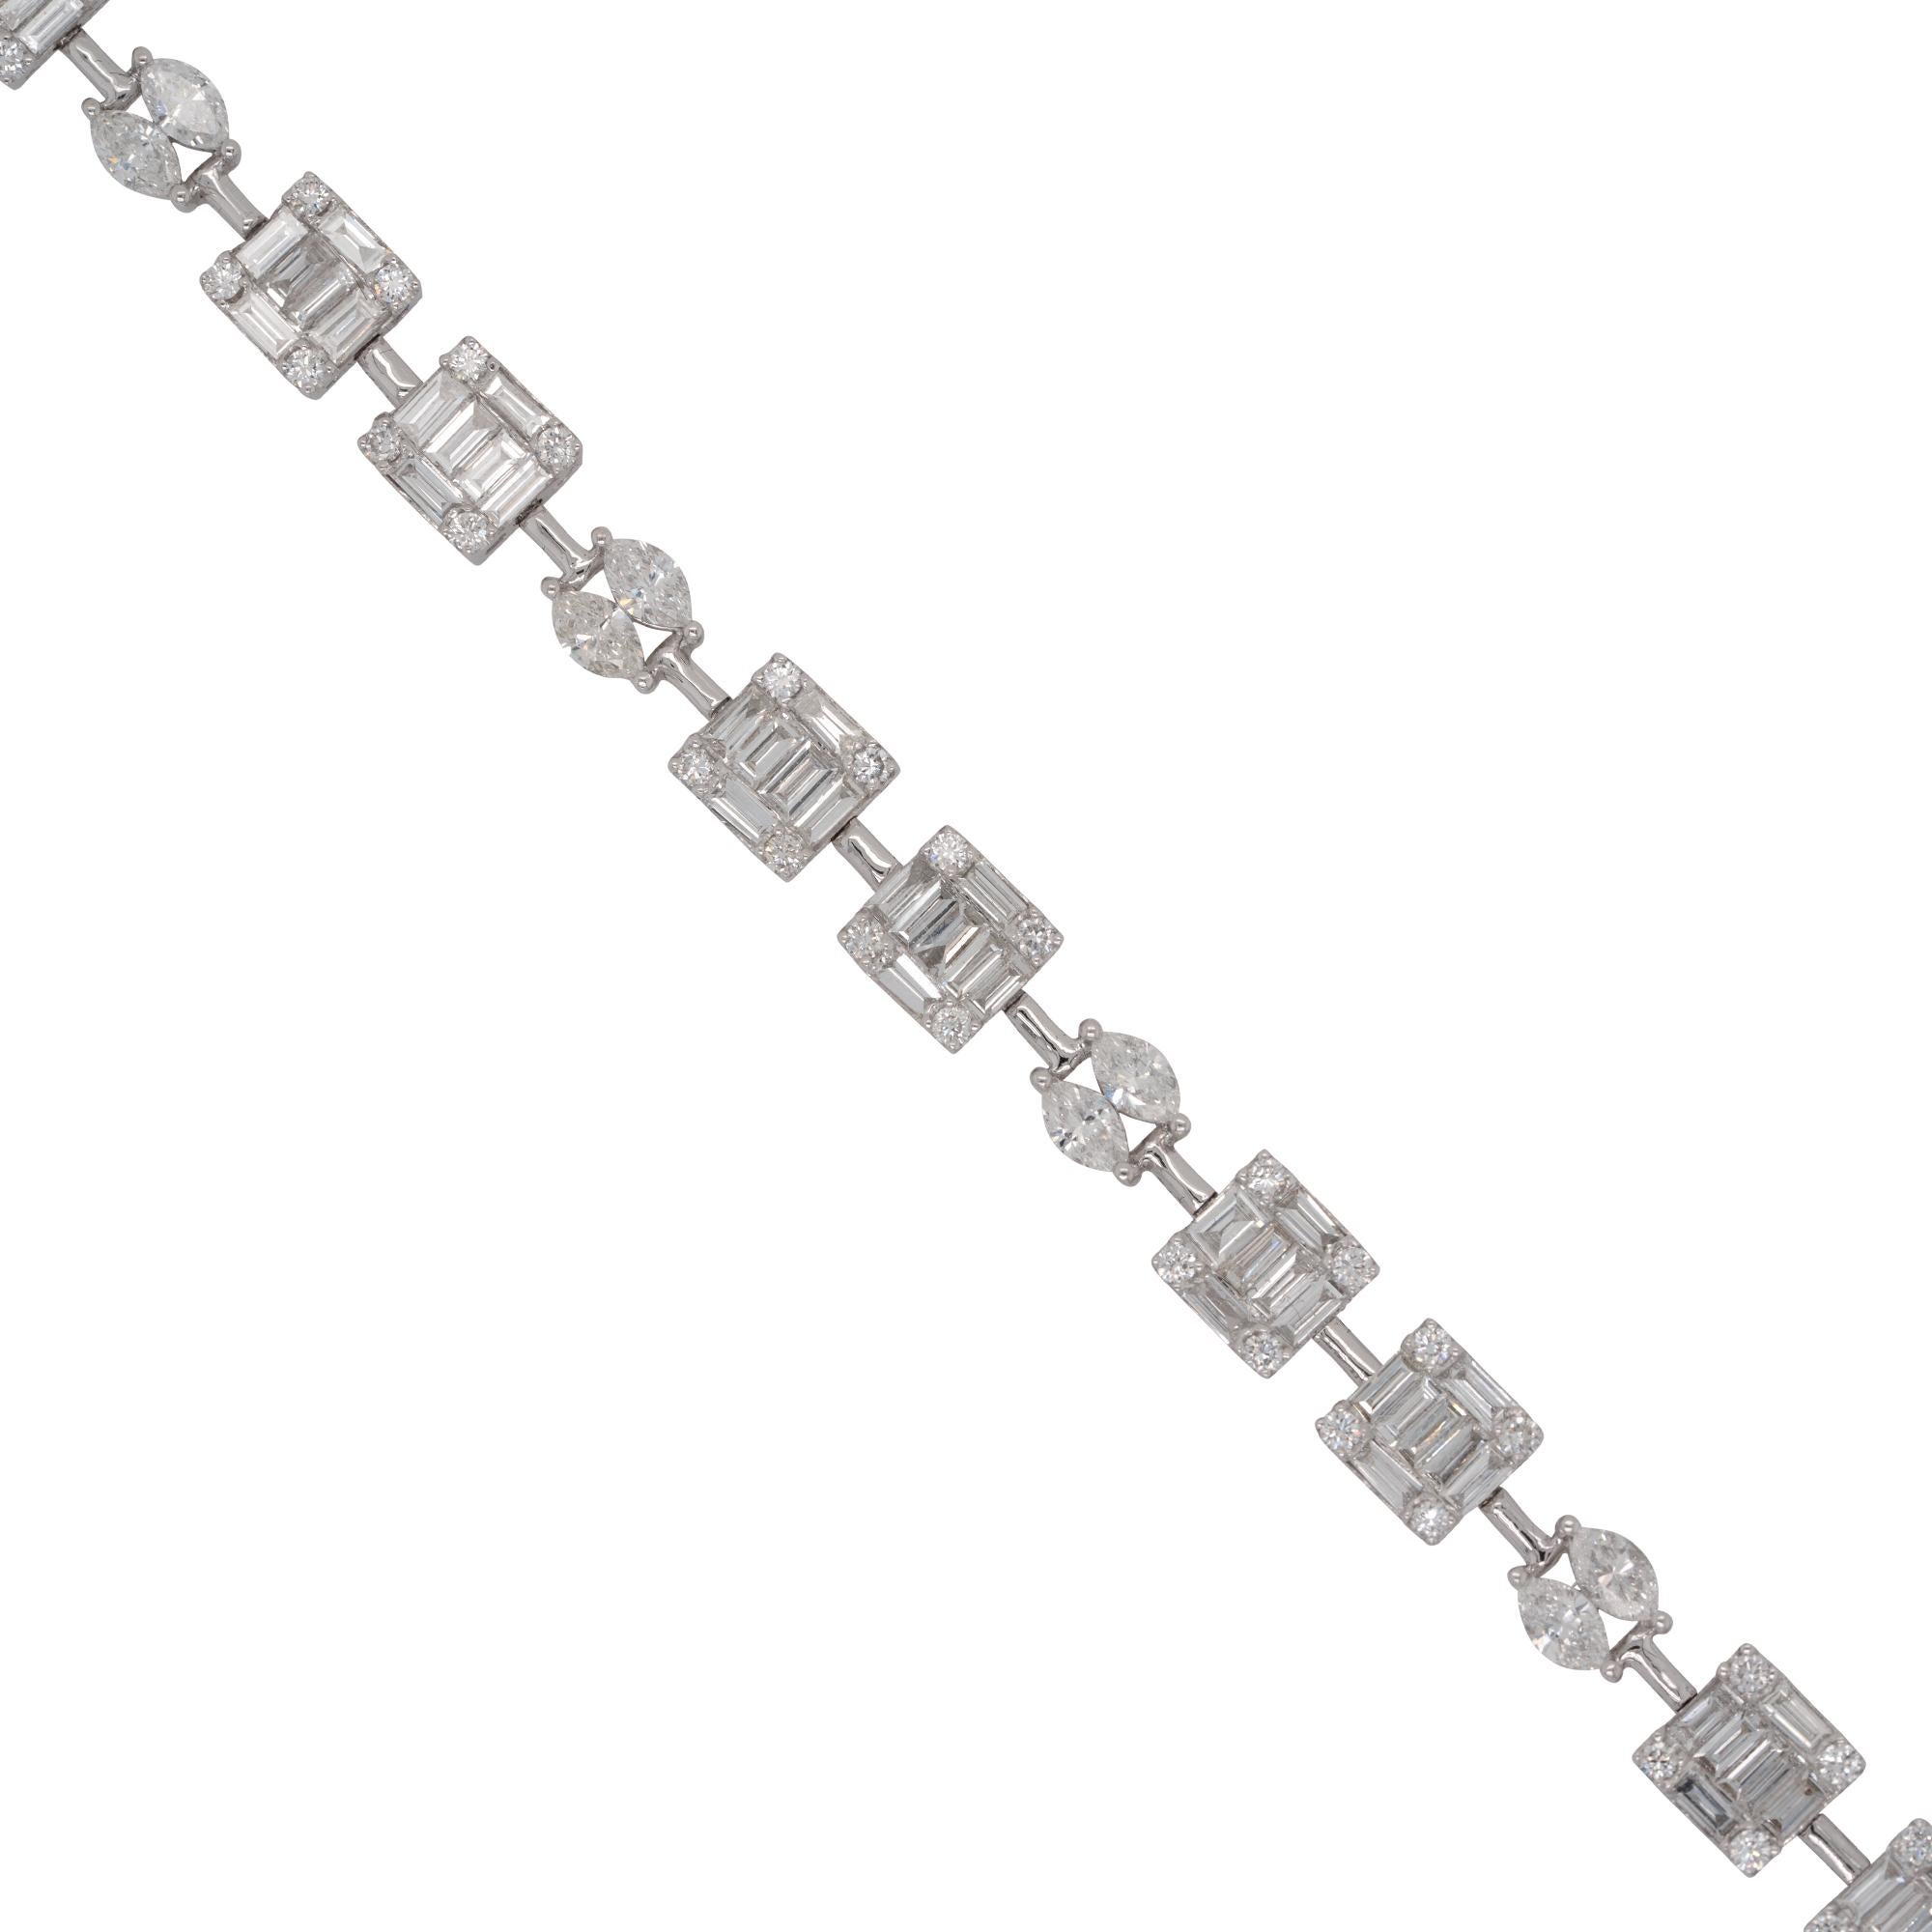 Material: 18k white gold
Diamond Details: Approx. 4.2ctw of round & baguette cut Diamonds. Diamonds are G/H in color and VS in clarity
Bracelet Measurements: 7 inches in length
Total Weight: 11g (7.1dwt)
Additional Details: This item comes with a